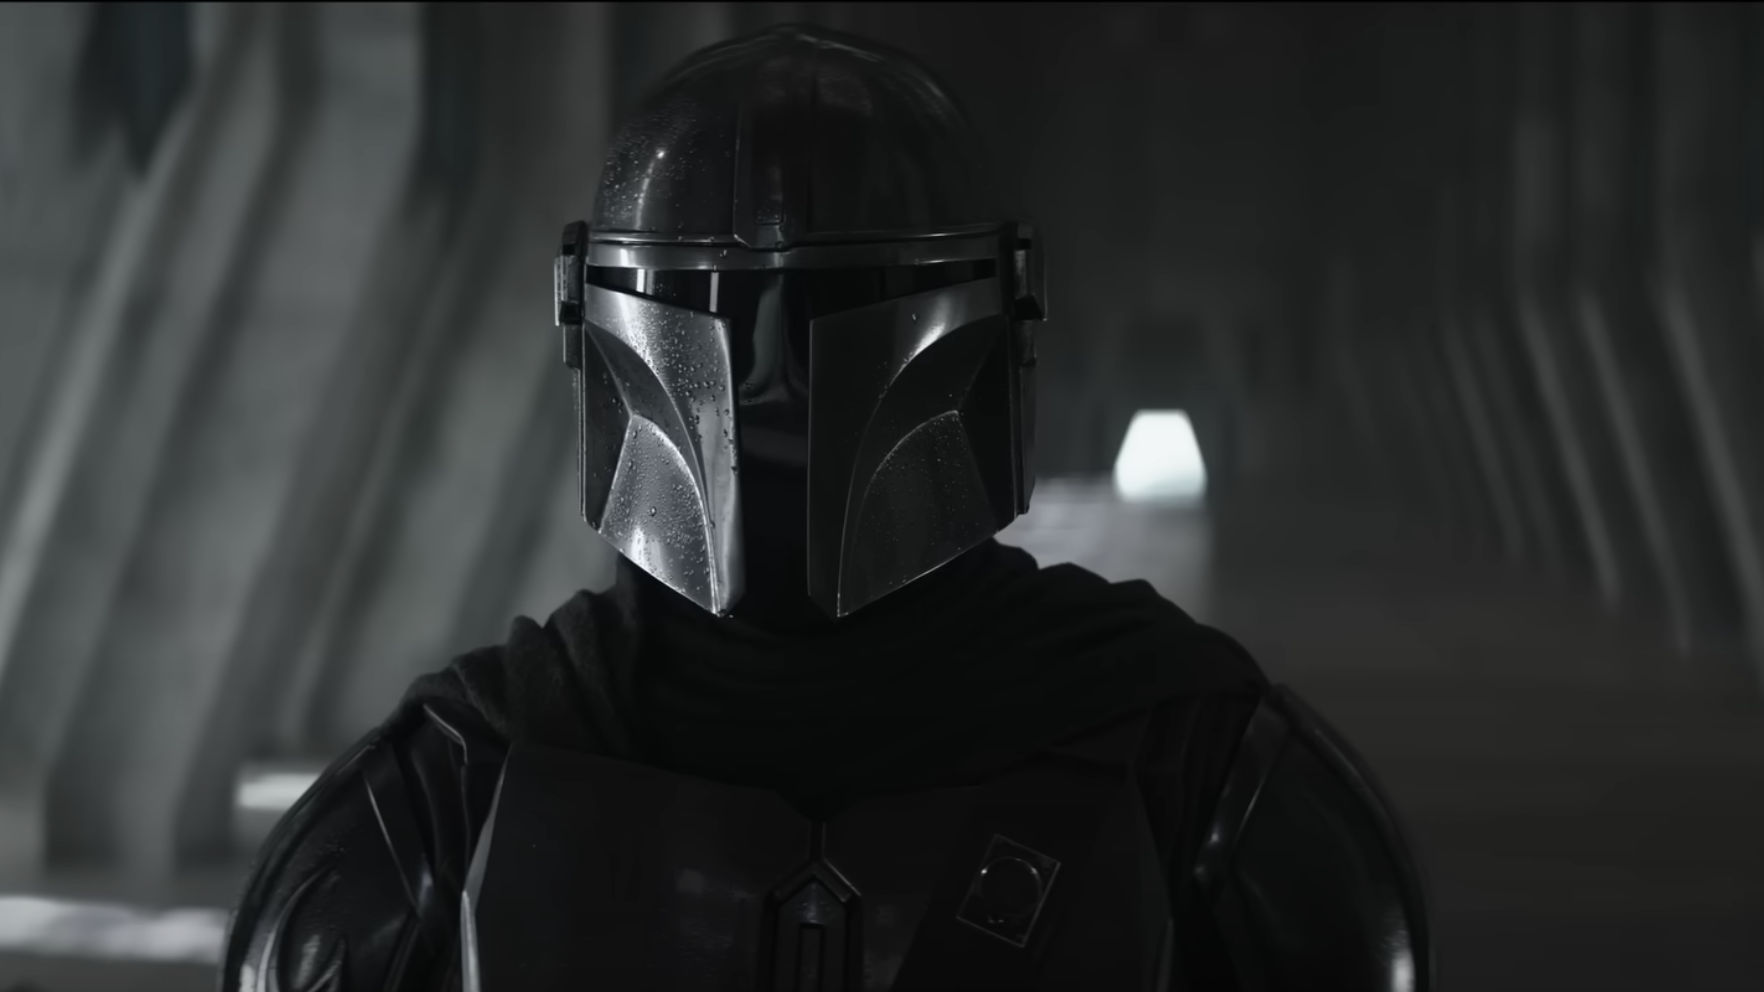 The Mandalorian Season 4: Is Disney Ending the Series With the